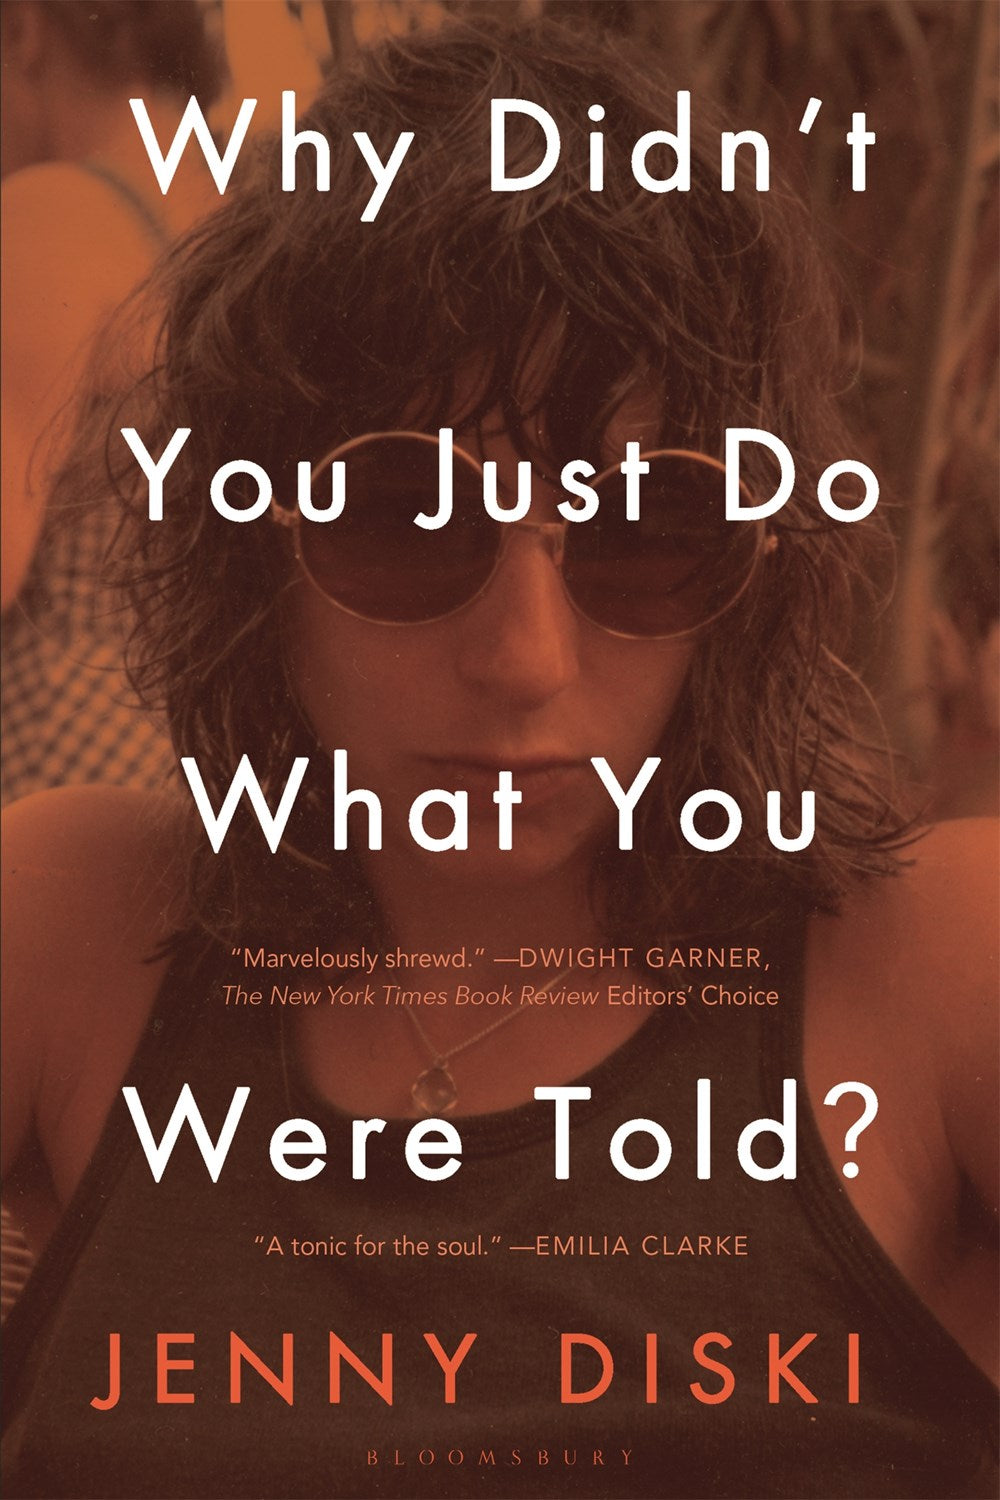 Why Didn't You Just Do What You Were Told? by Jenny Diski